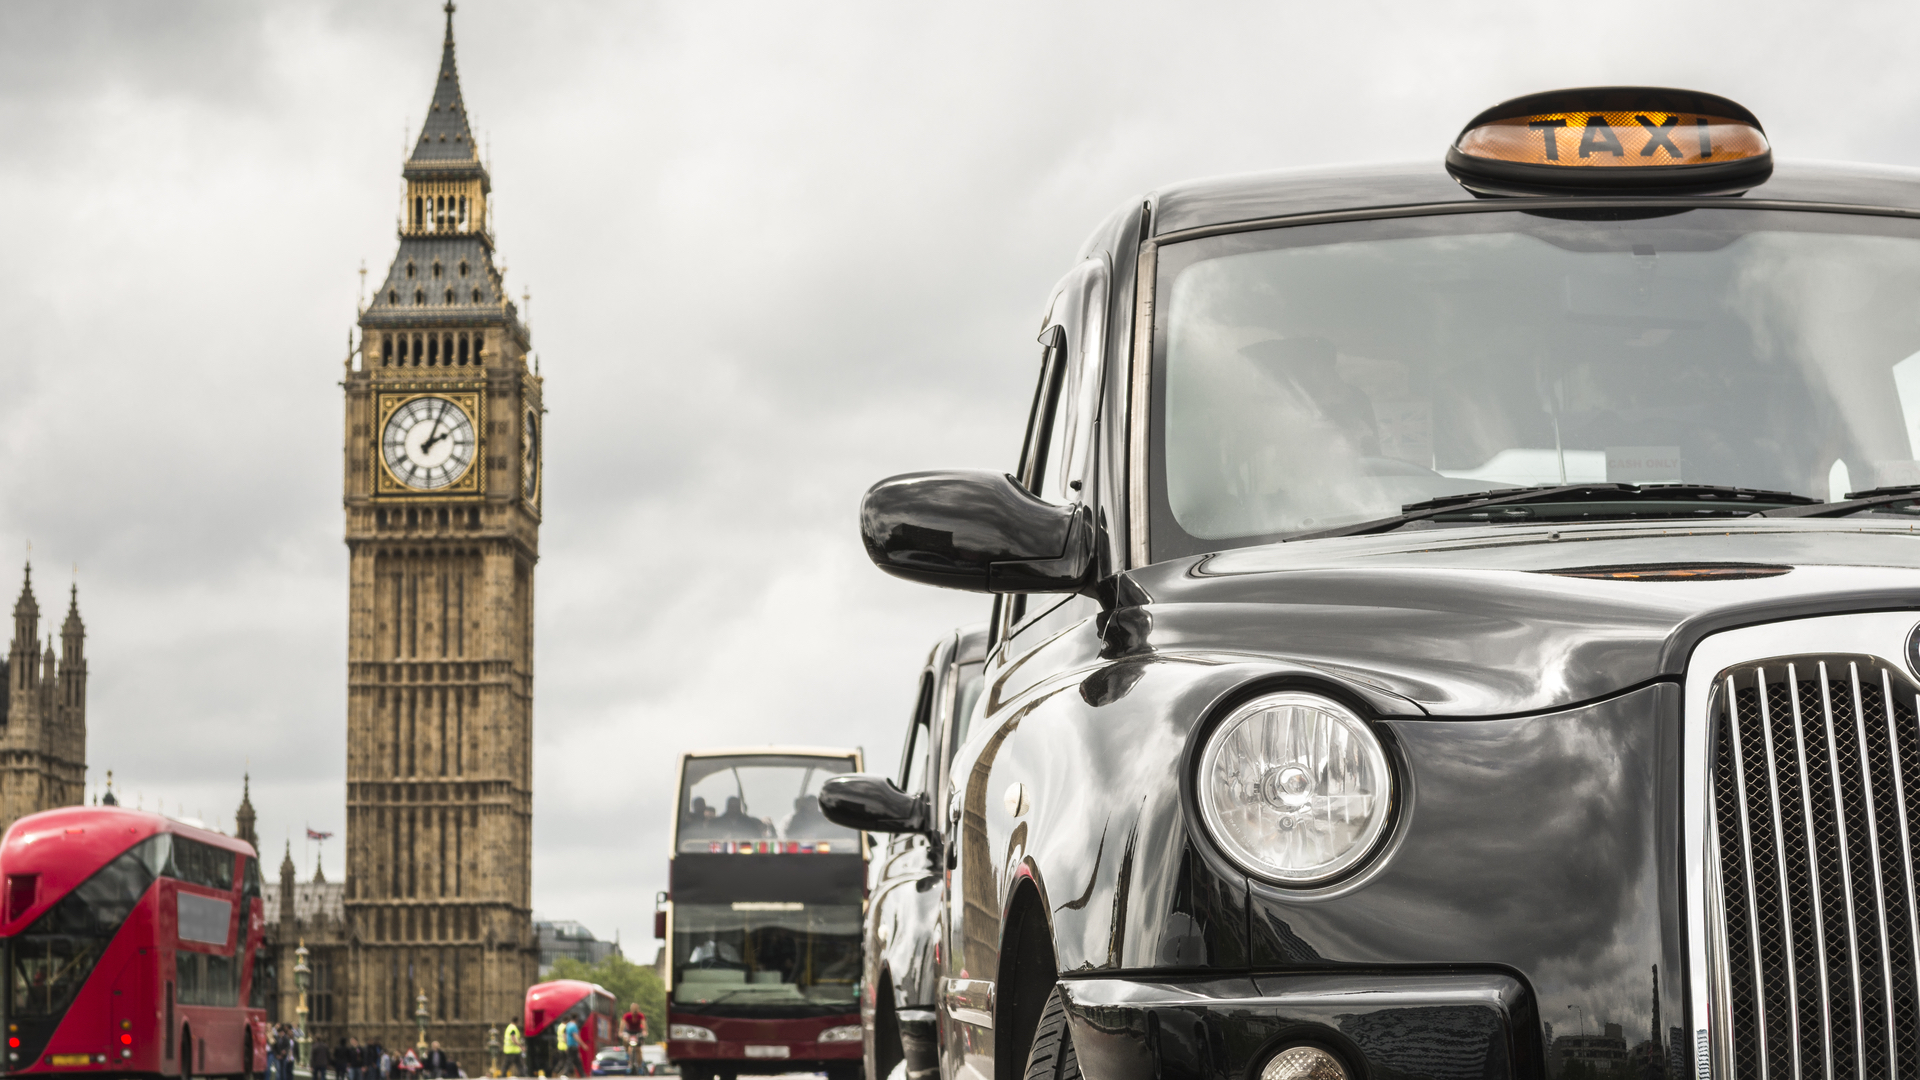 Age limit for London black cabs reduced to 12 years